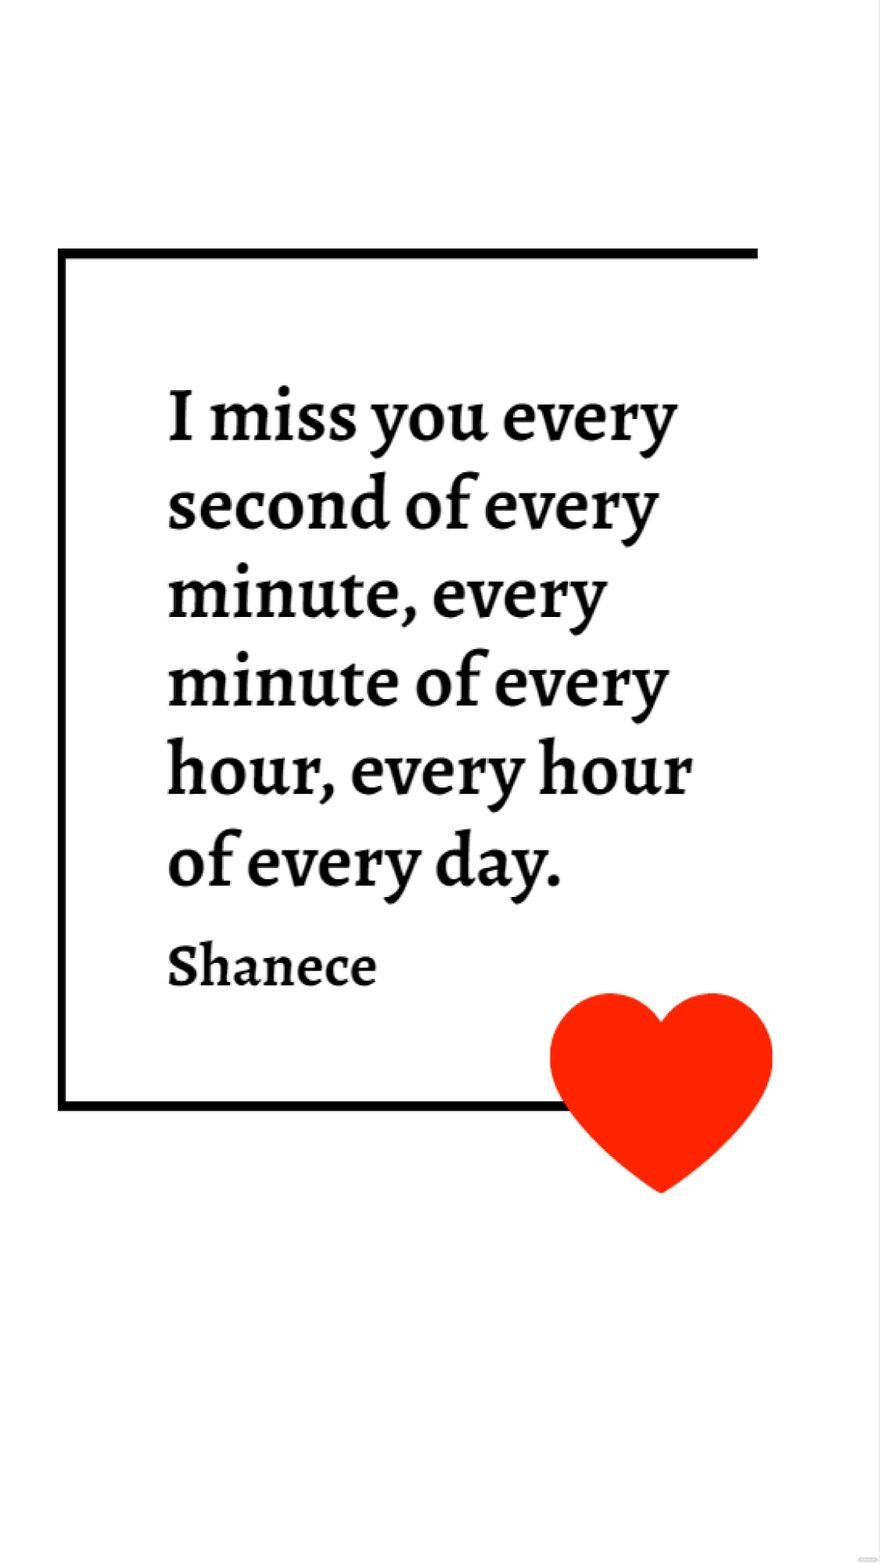 Shanece - I miss you every second of every minute, every minute of every hour, every hour of every day.